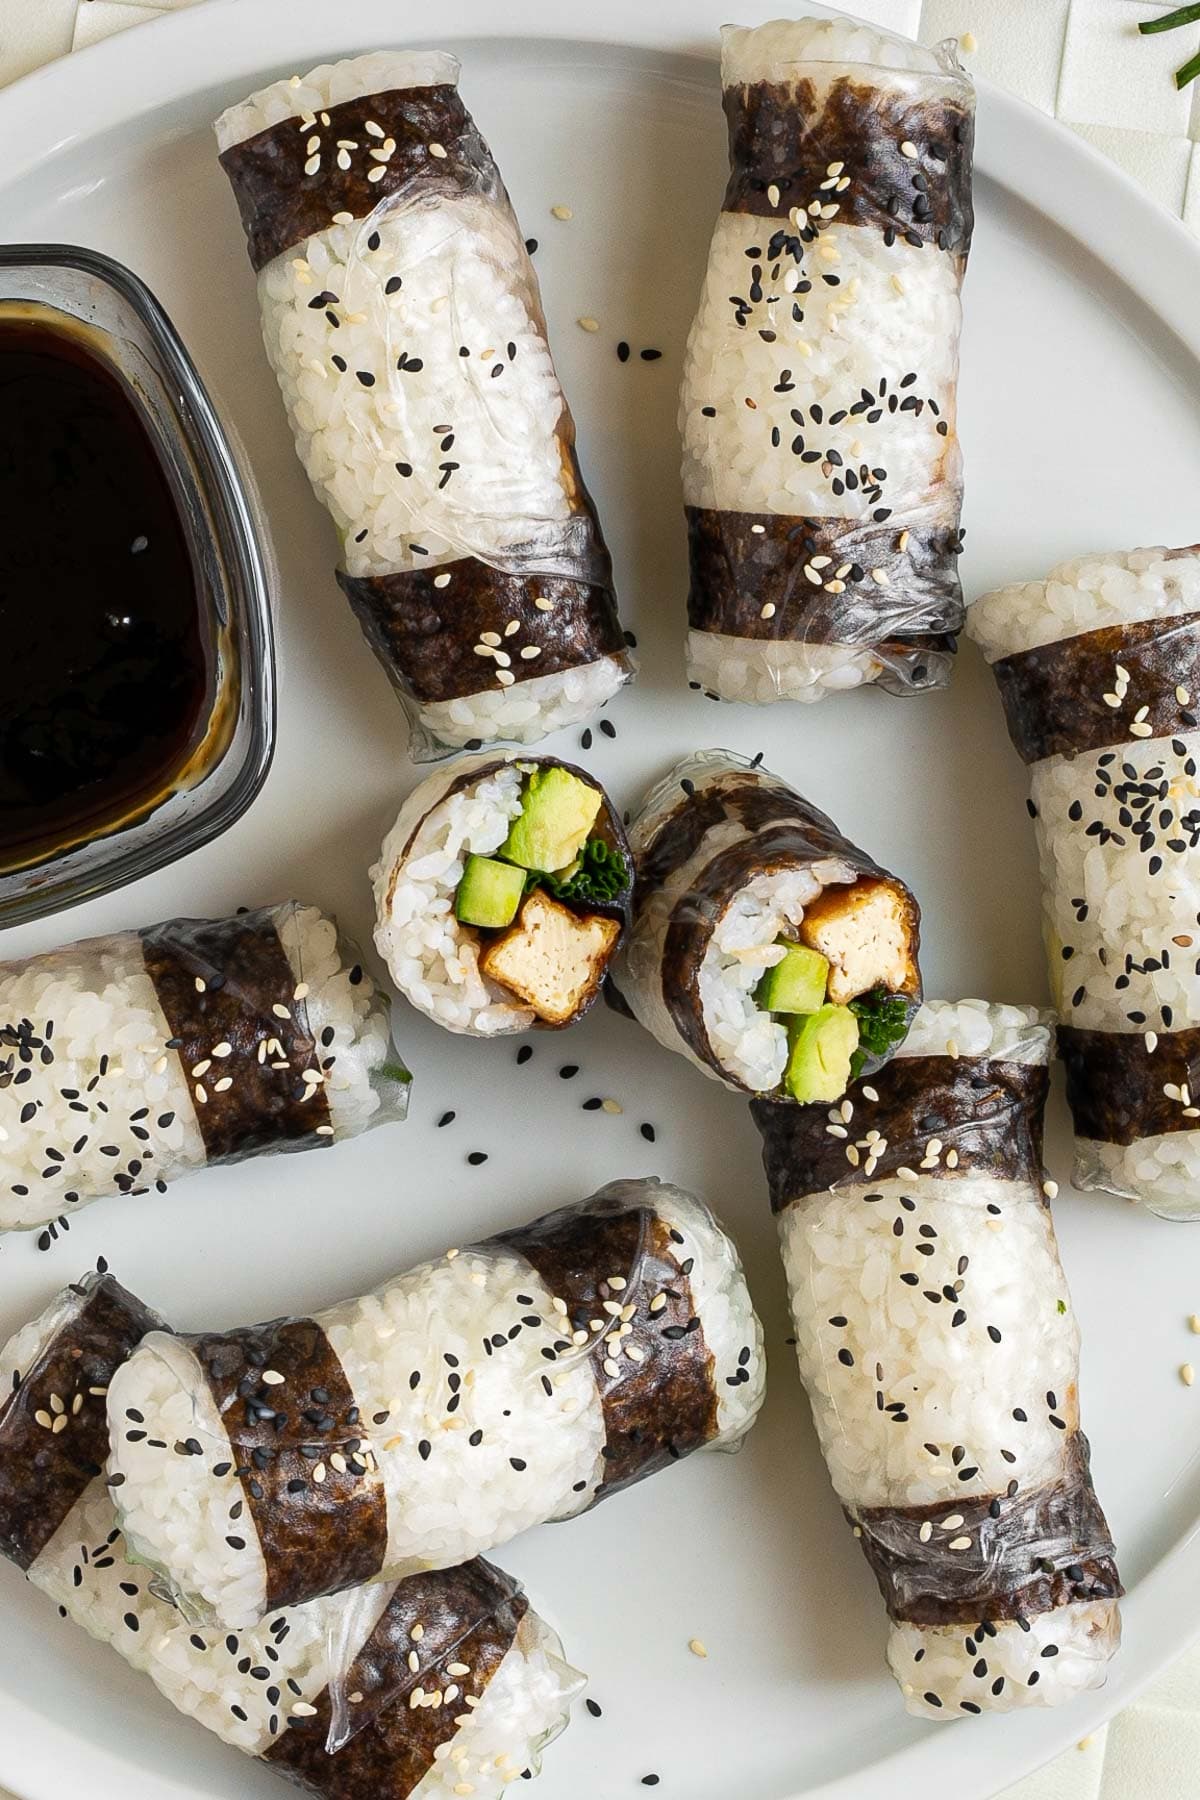 Black and white spring rolls wrapped in rice paper. In the middle, there are two halves where you can see the filing of tofu sticks, avocado and cucumber. 